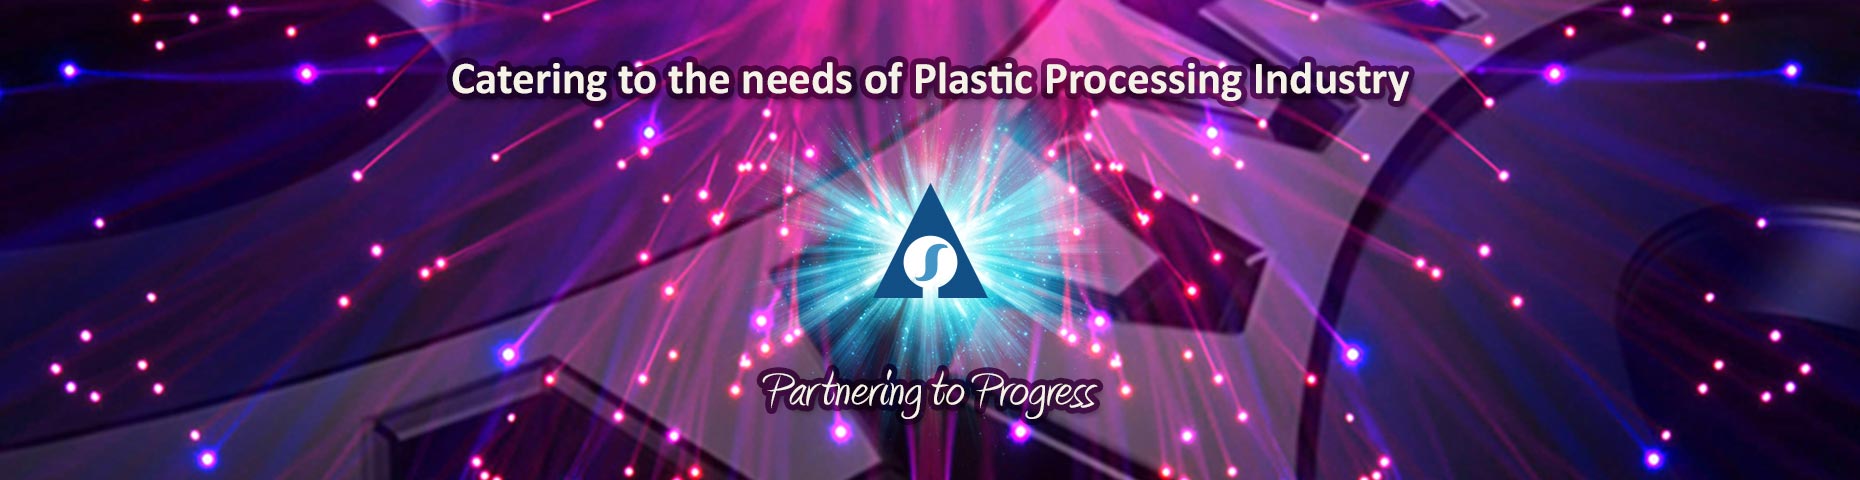 Catering to the needs of Plastic Processing Industry